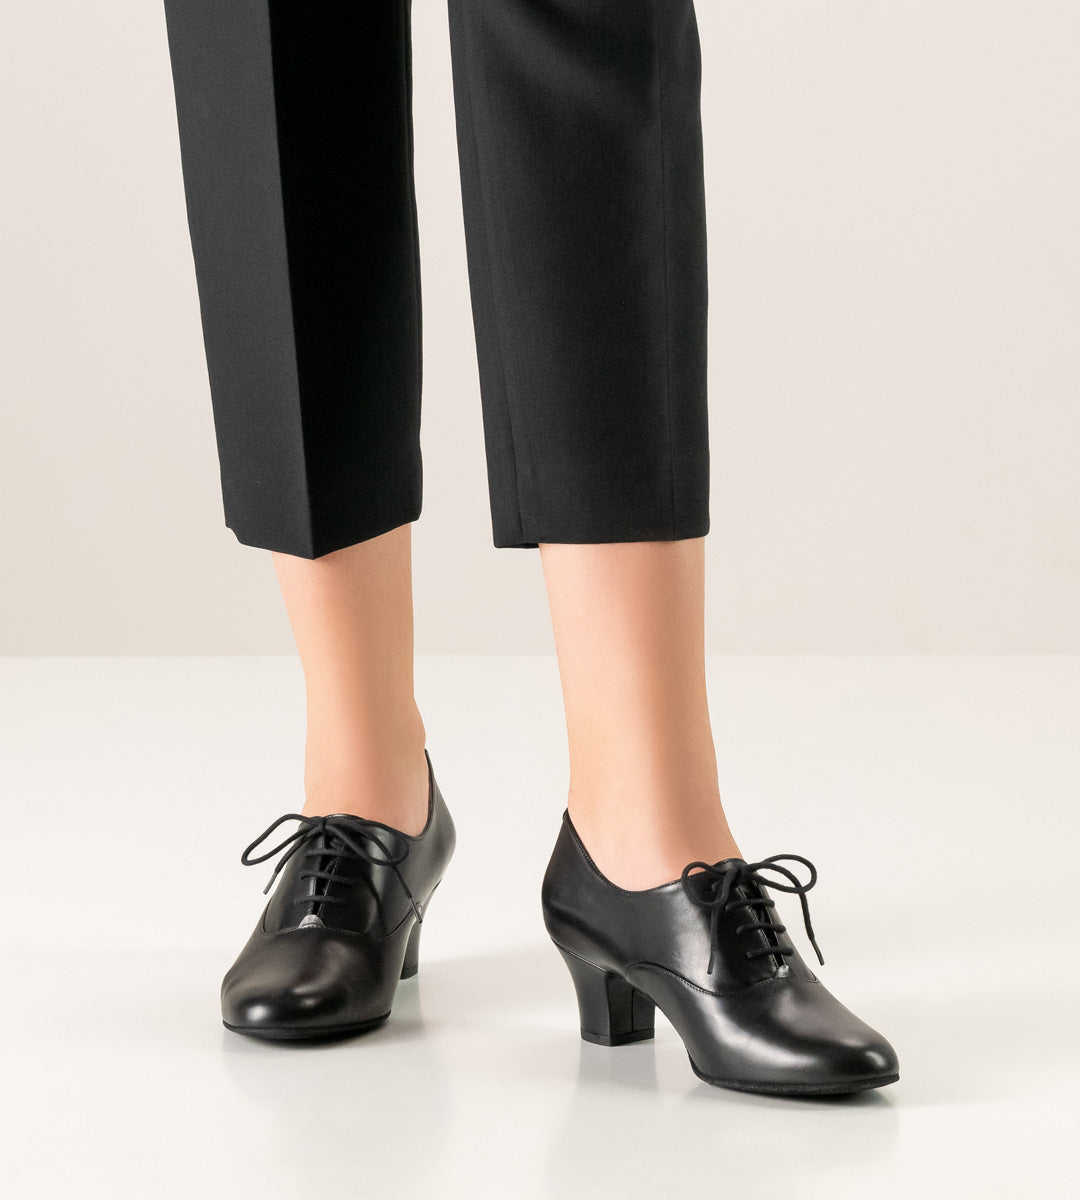 Ladies Practice Dance Shoes in Black Leather with a variety of Heel Heights